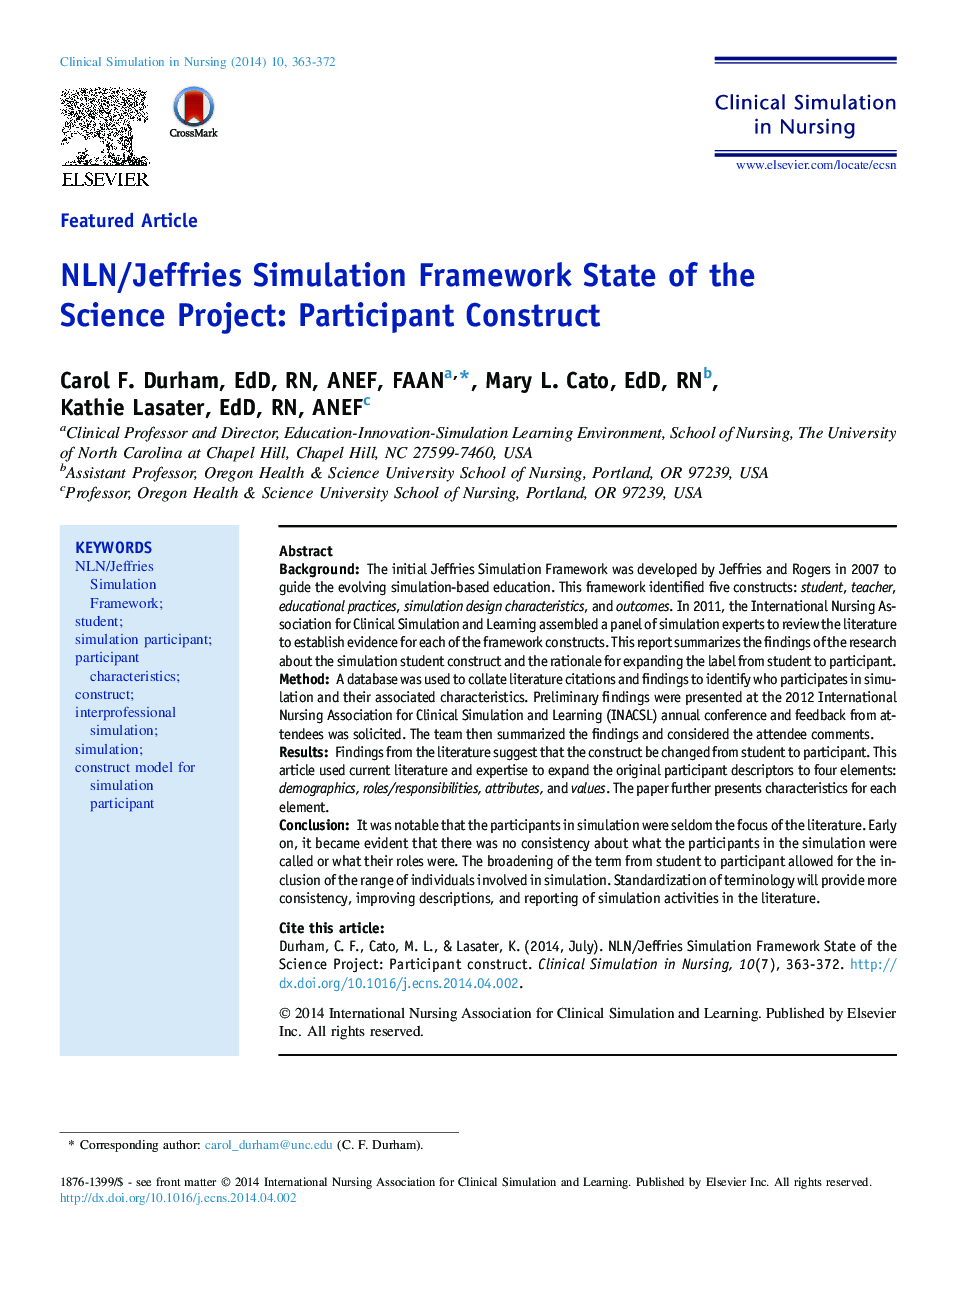 NLN/Jeffries Simulation Framework State of the Science Project: Participant Construct